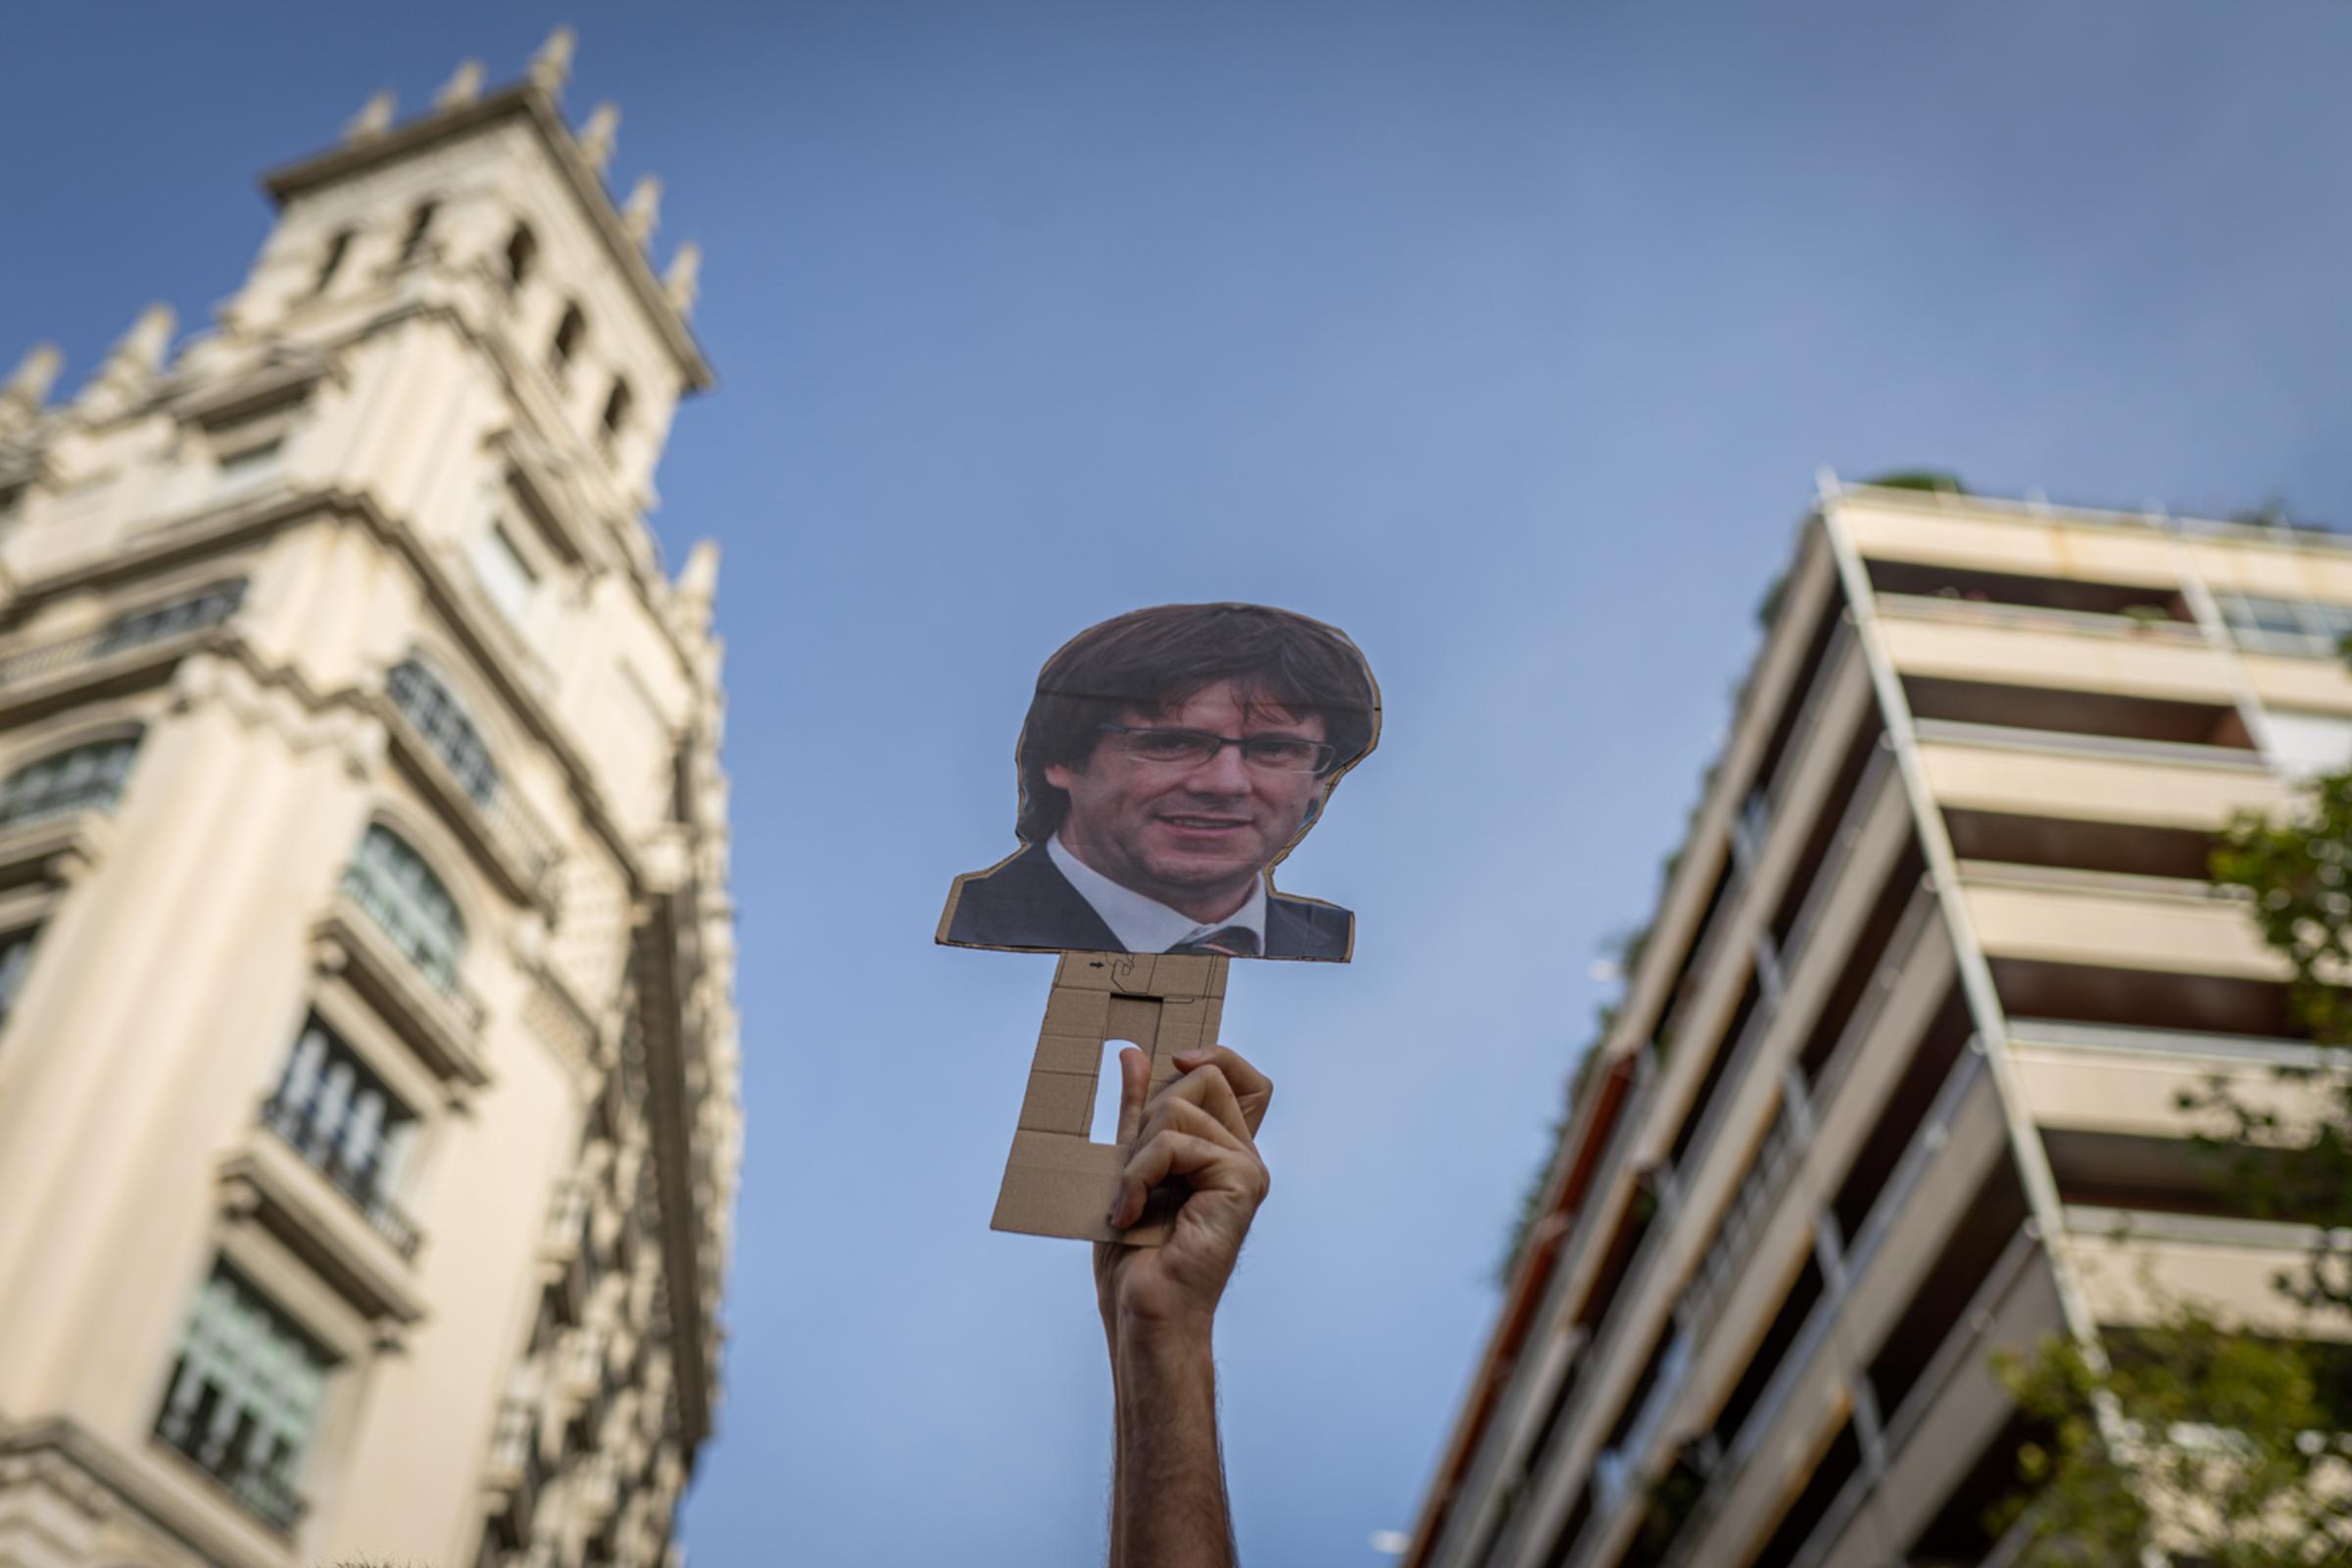 Daily news - A protester raises a mask with Puigdemont's face on...